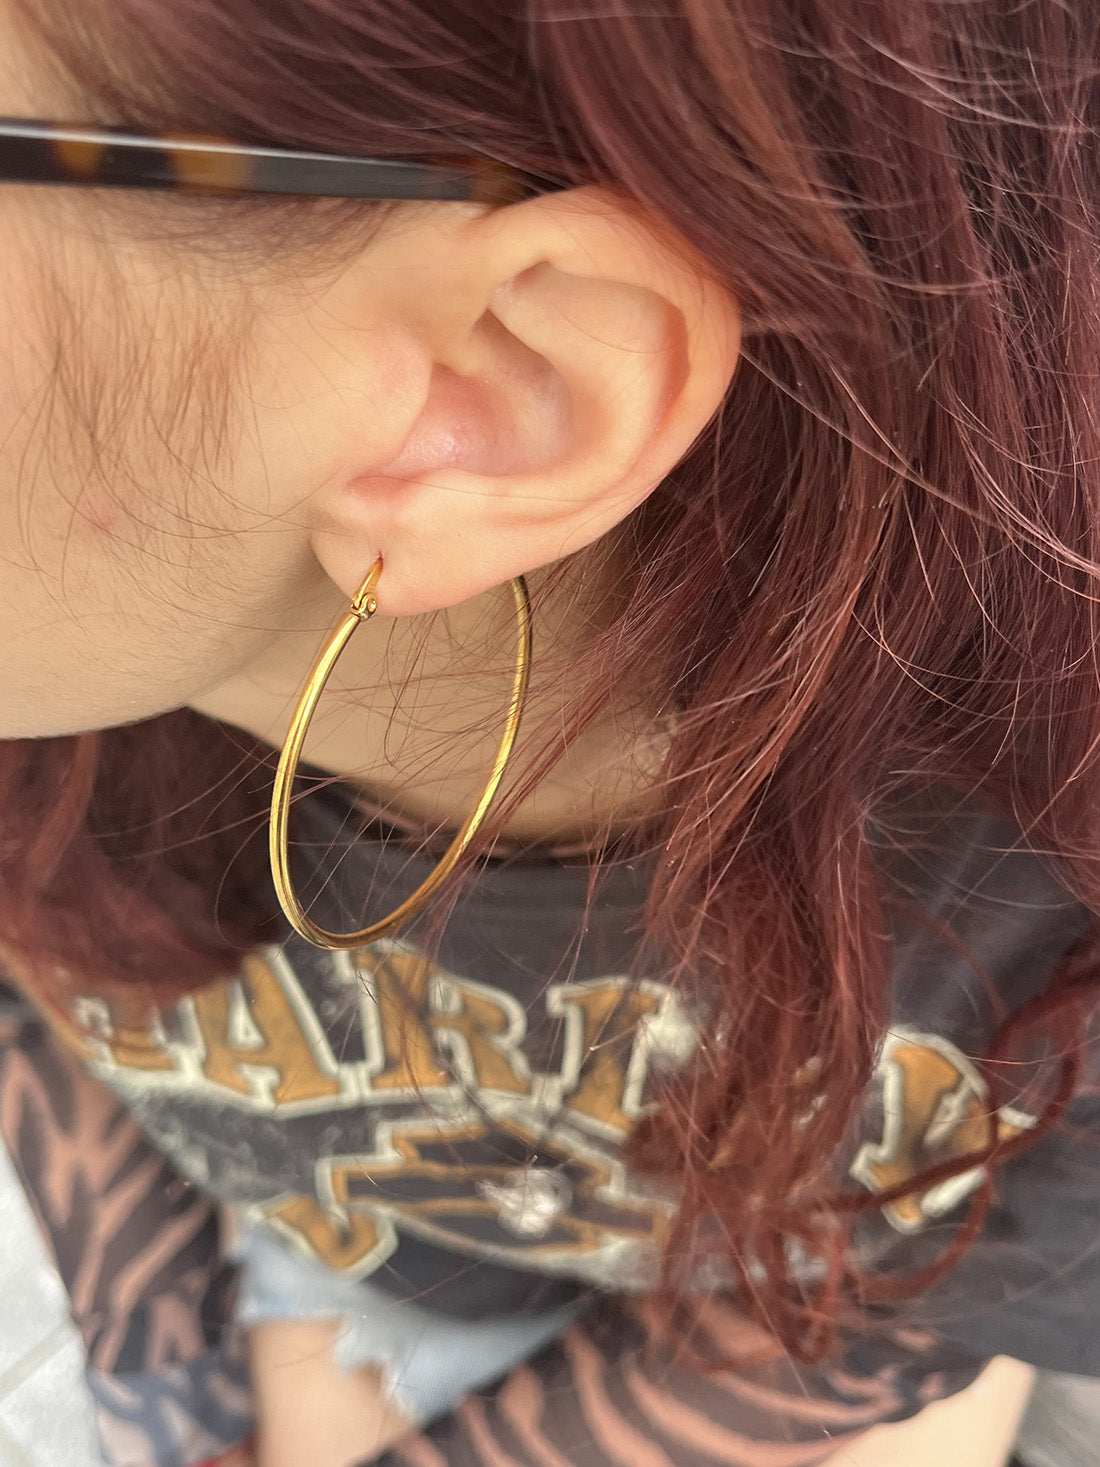 Gold Stainless Steel Hoops